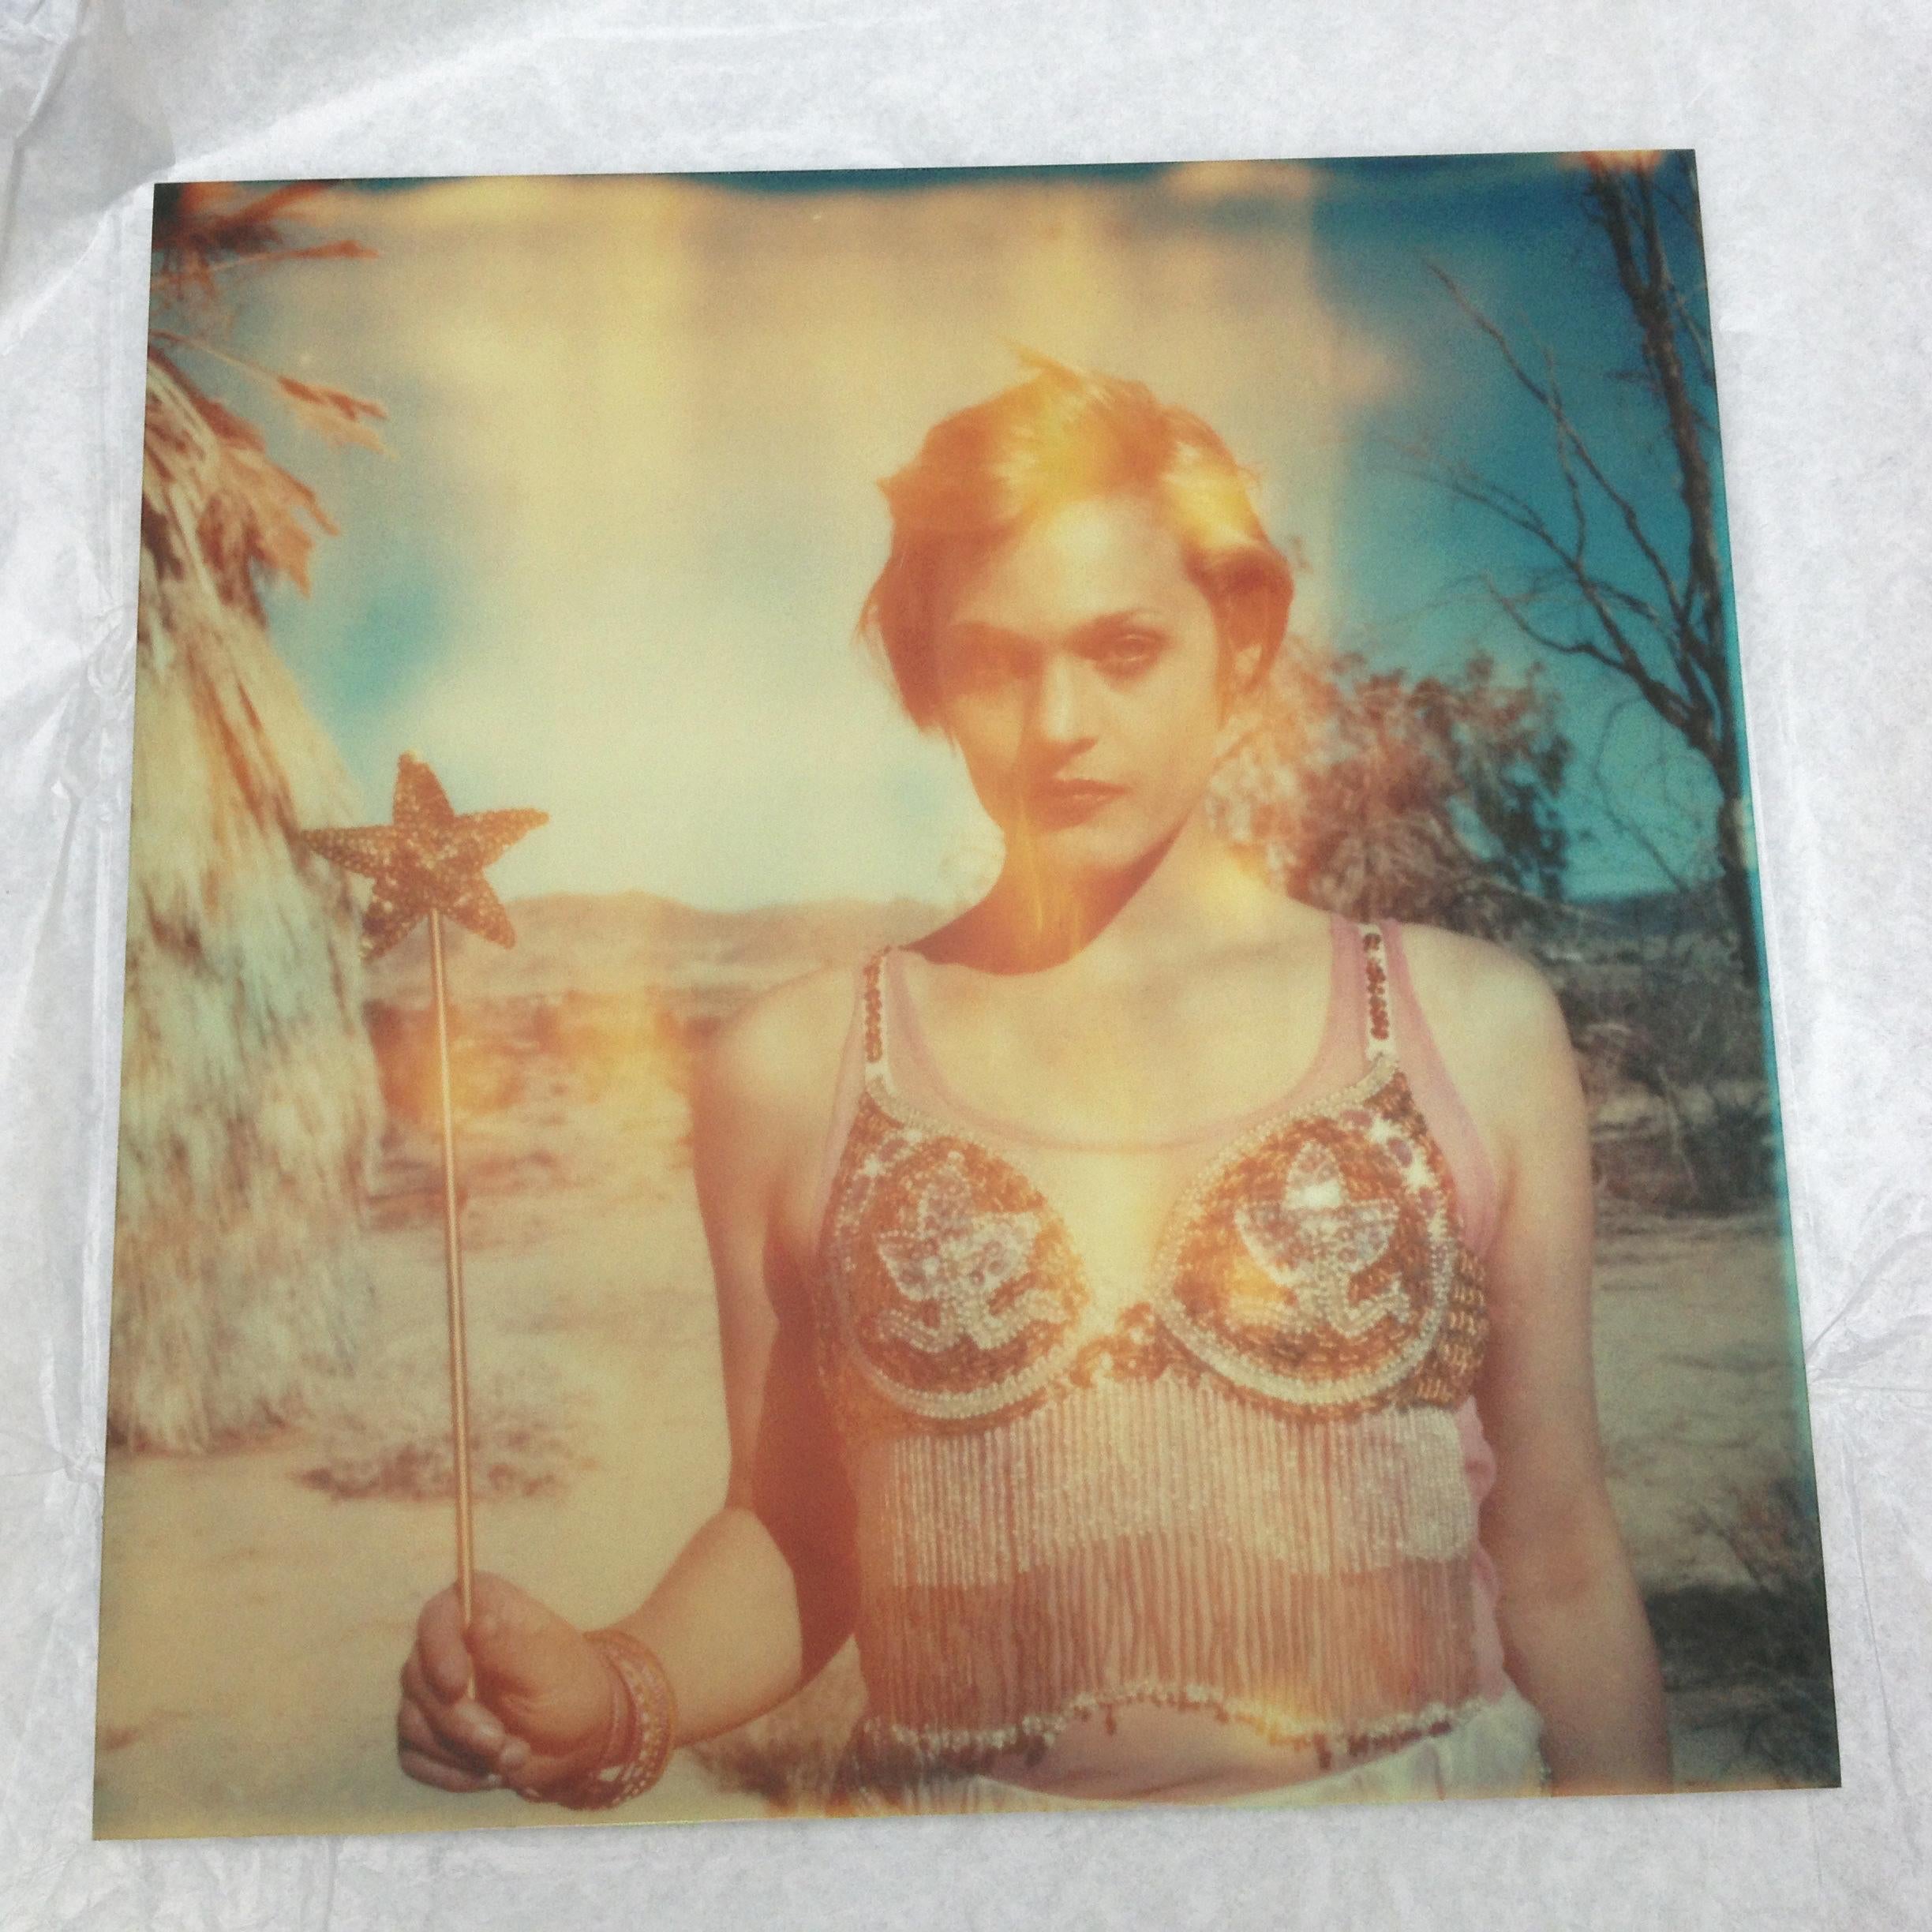 The Muse (29 Palms, CA) - analog, mounted - Polaroid, 21st Century, Contemporary - Photograph by Stefanie Schneider